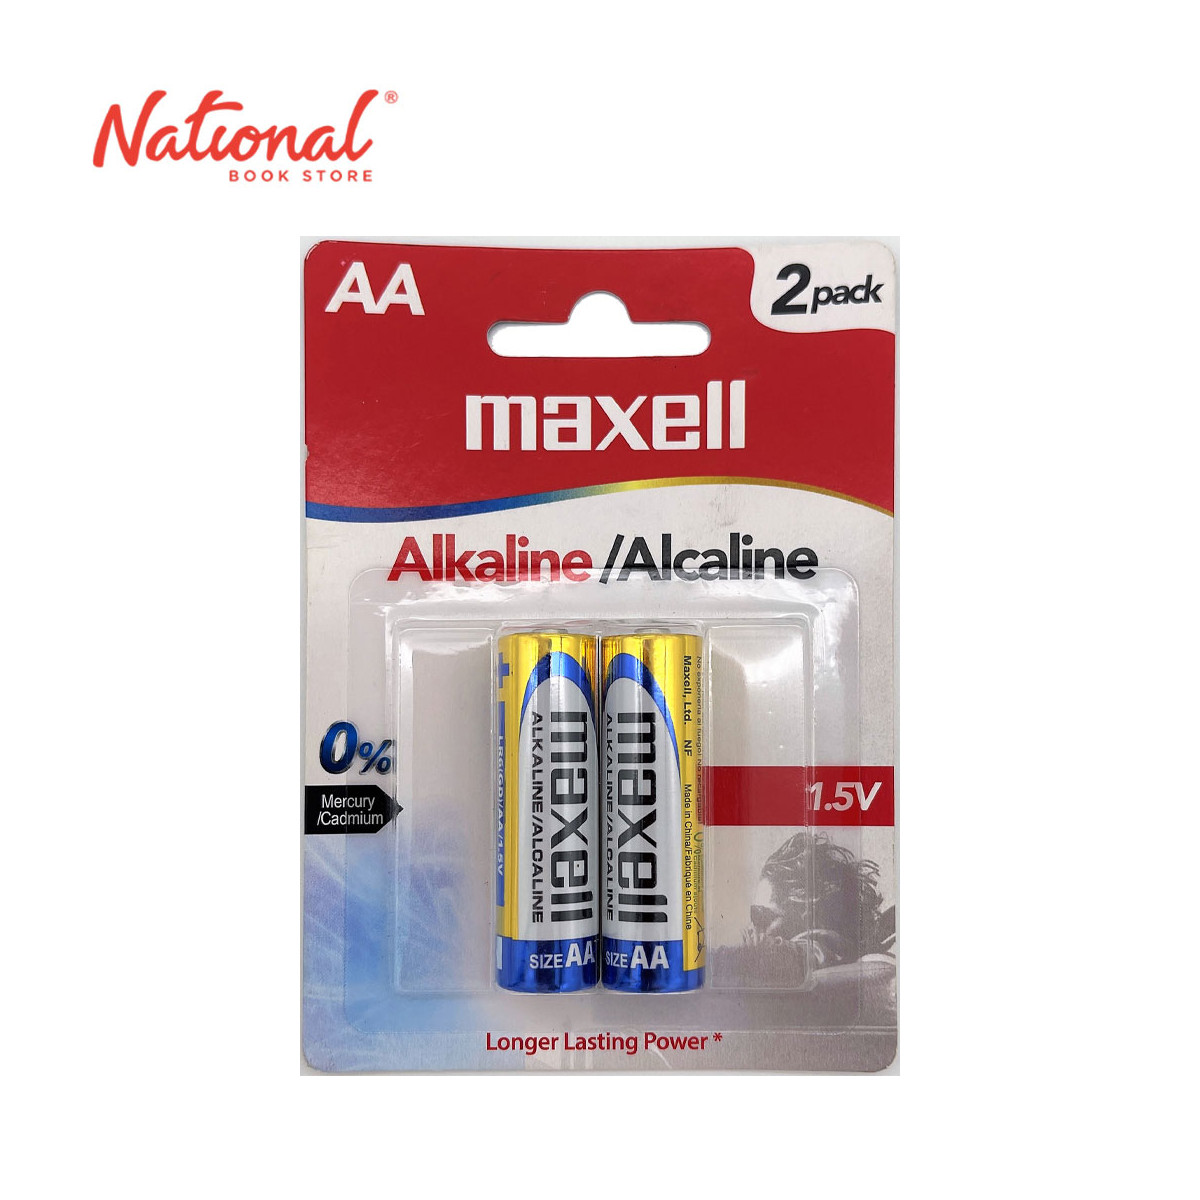 Maxell Battery Alkaline AA 2 pieces - Home & Office Supplies